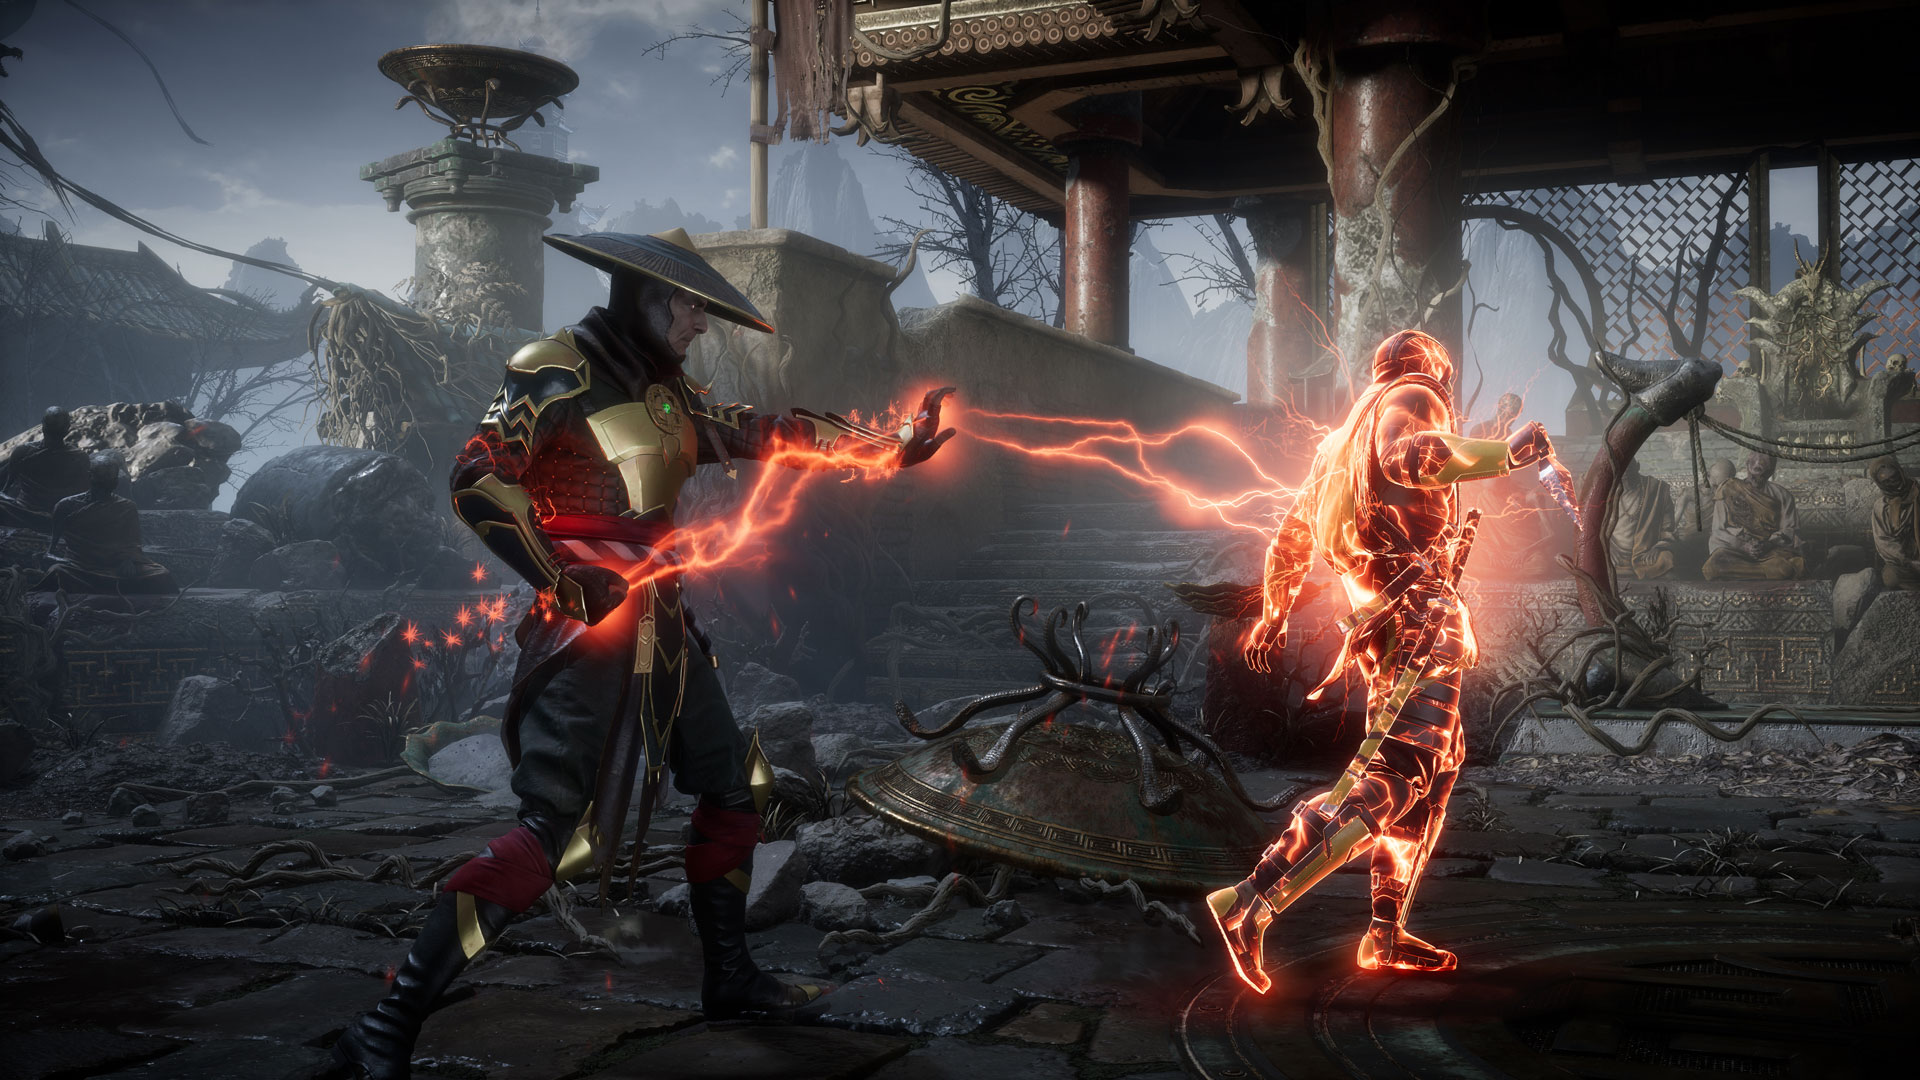 Mortal Kombat 11, One of The Best Gaming PC Games Releases This Month.